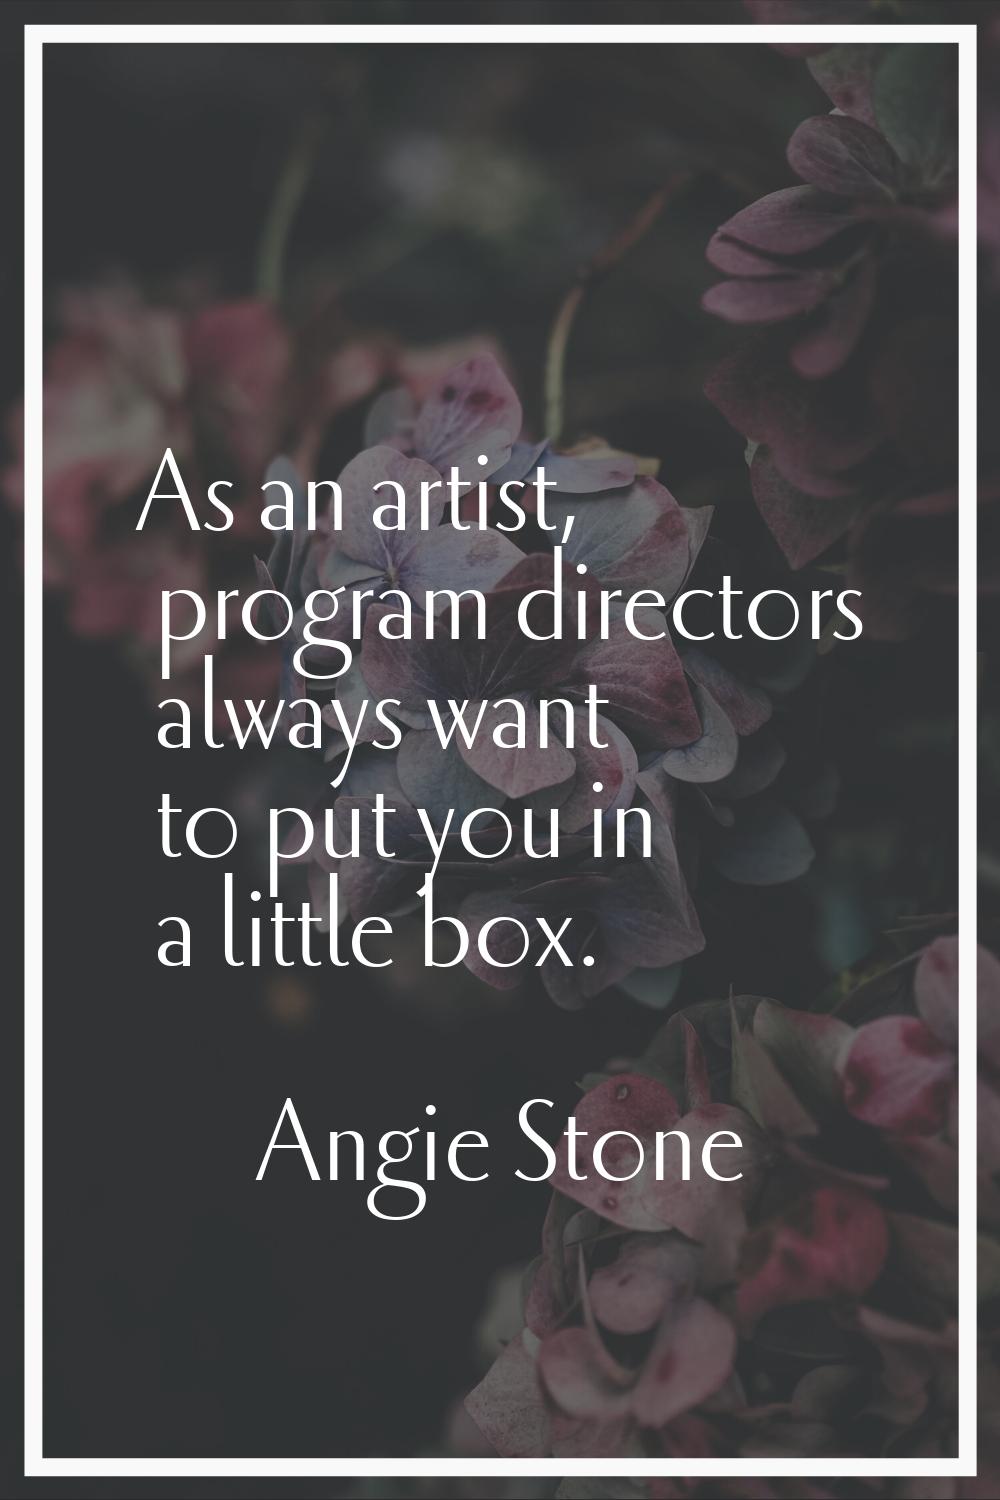 As an artist, program directors always want to put you in a little box.